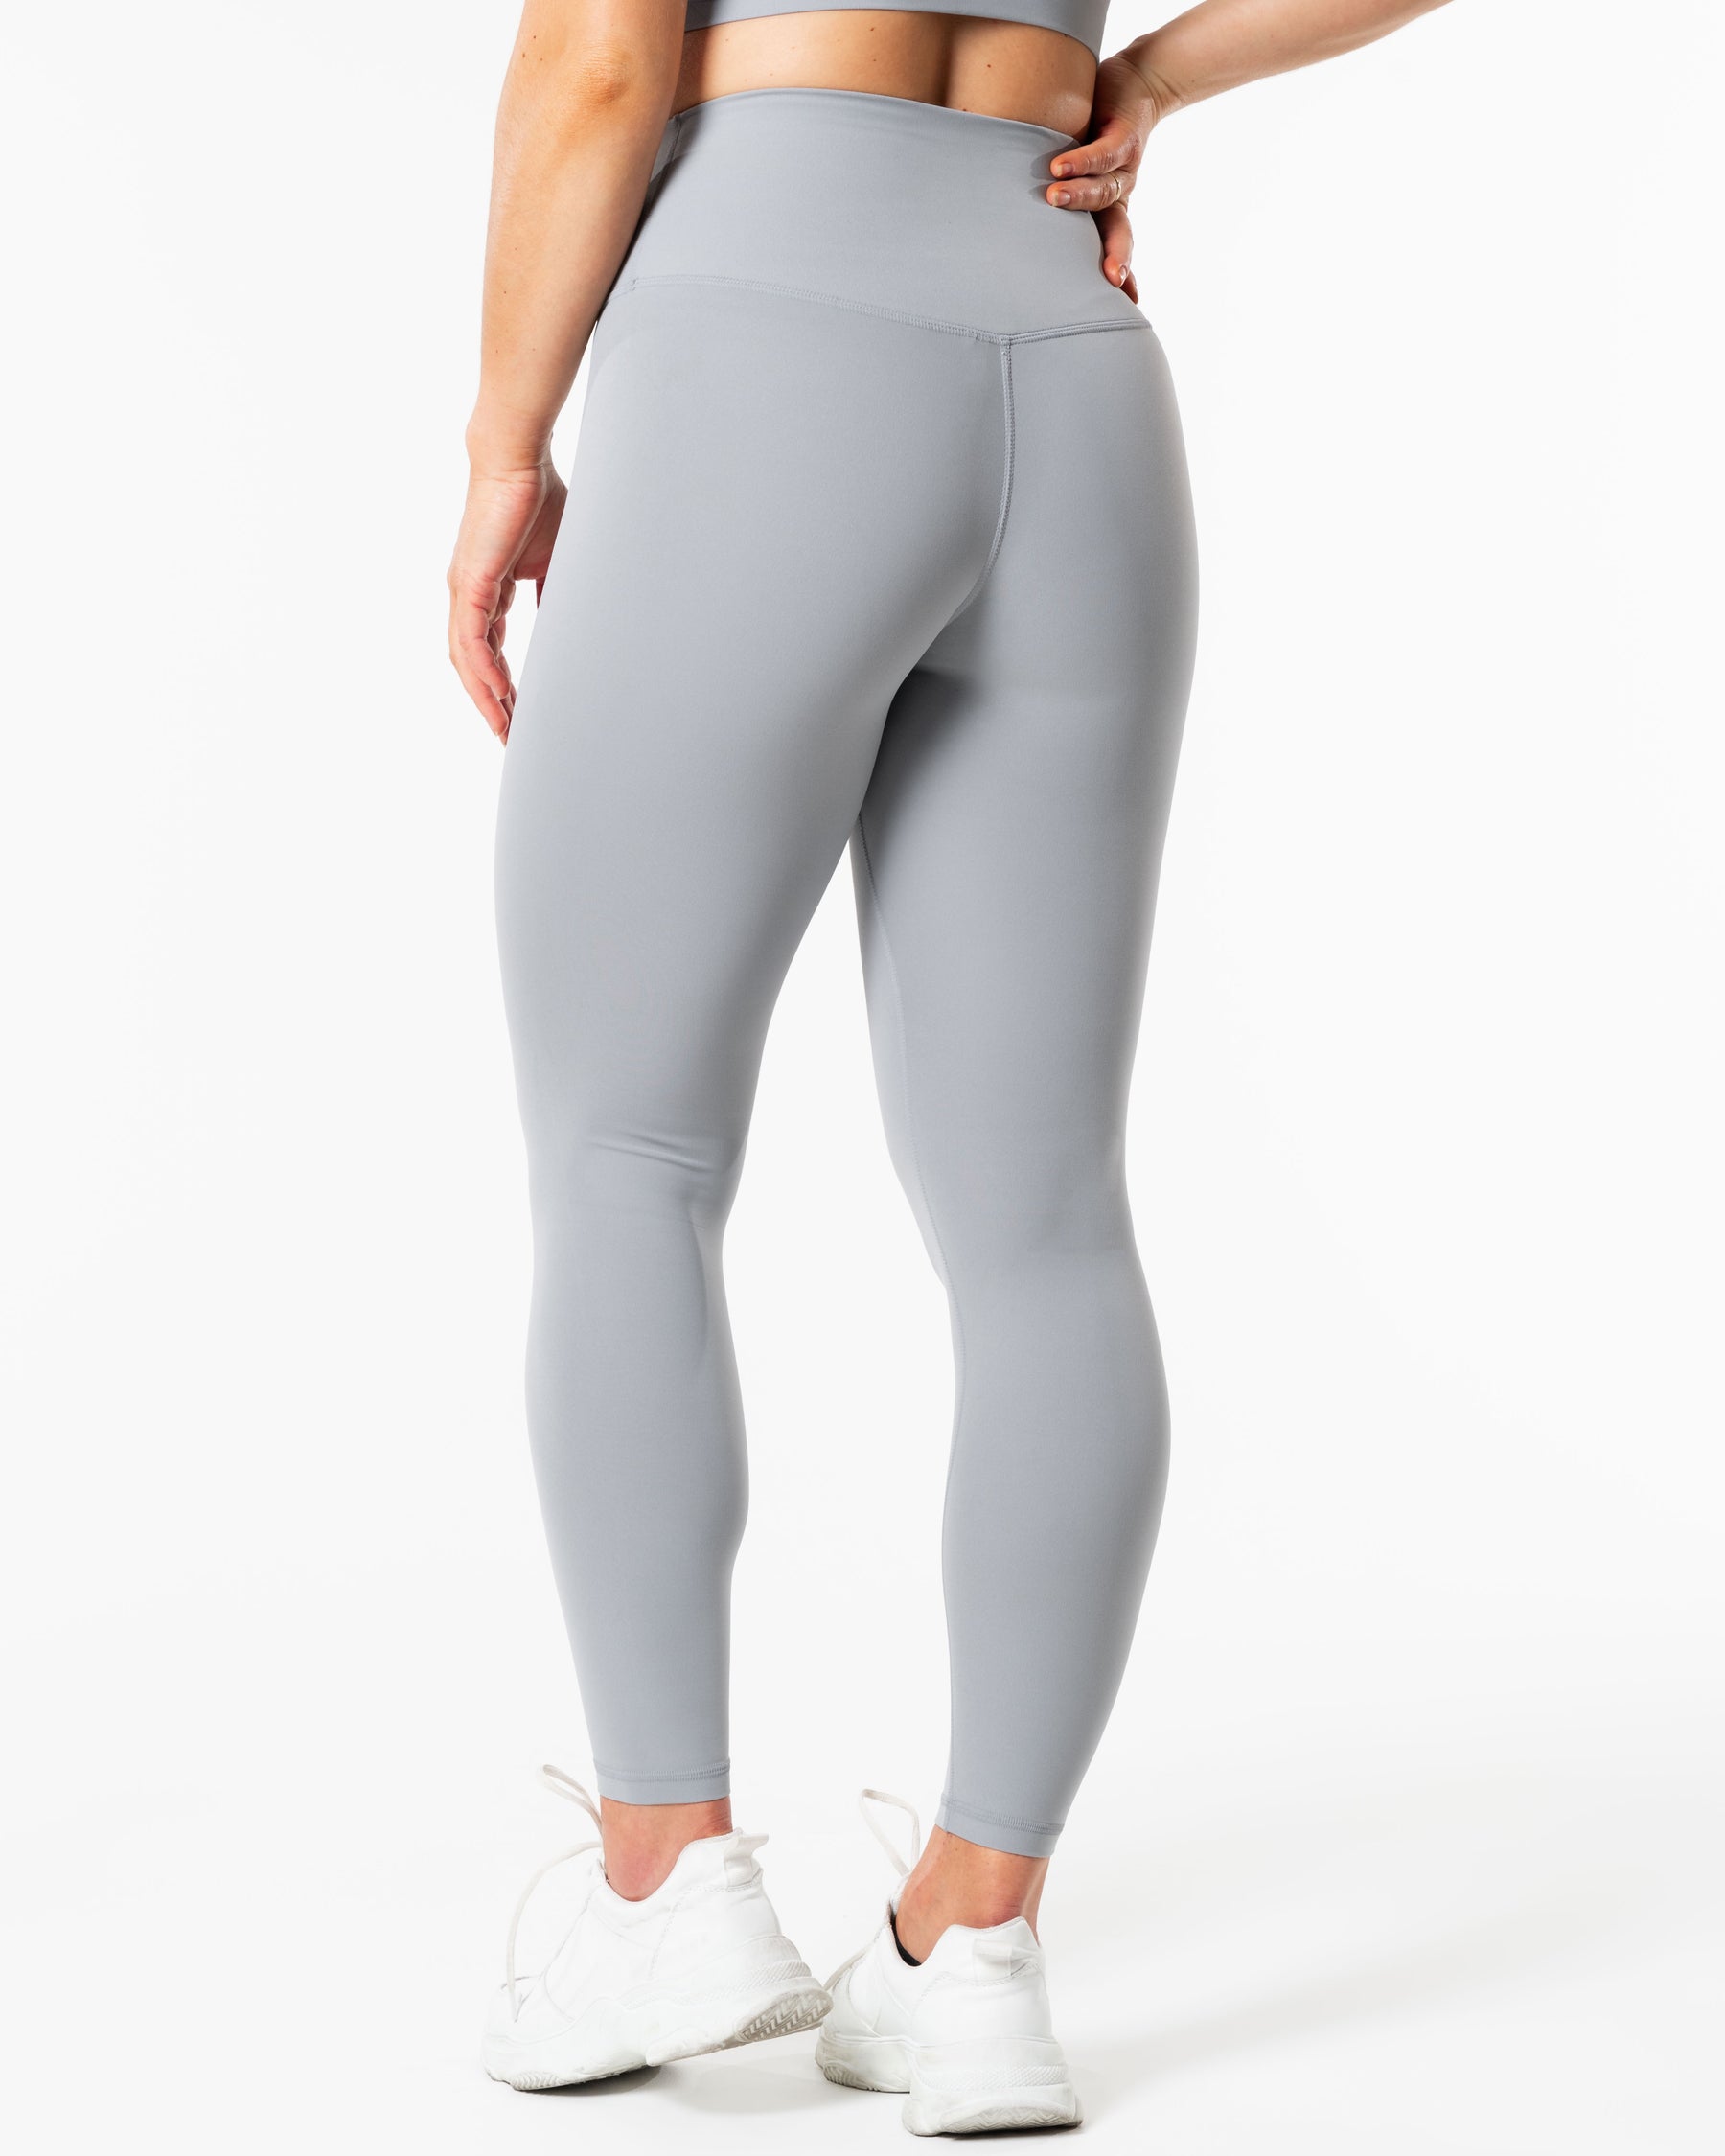 Mercy Tights - Light Grey - RELODE